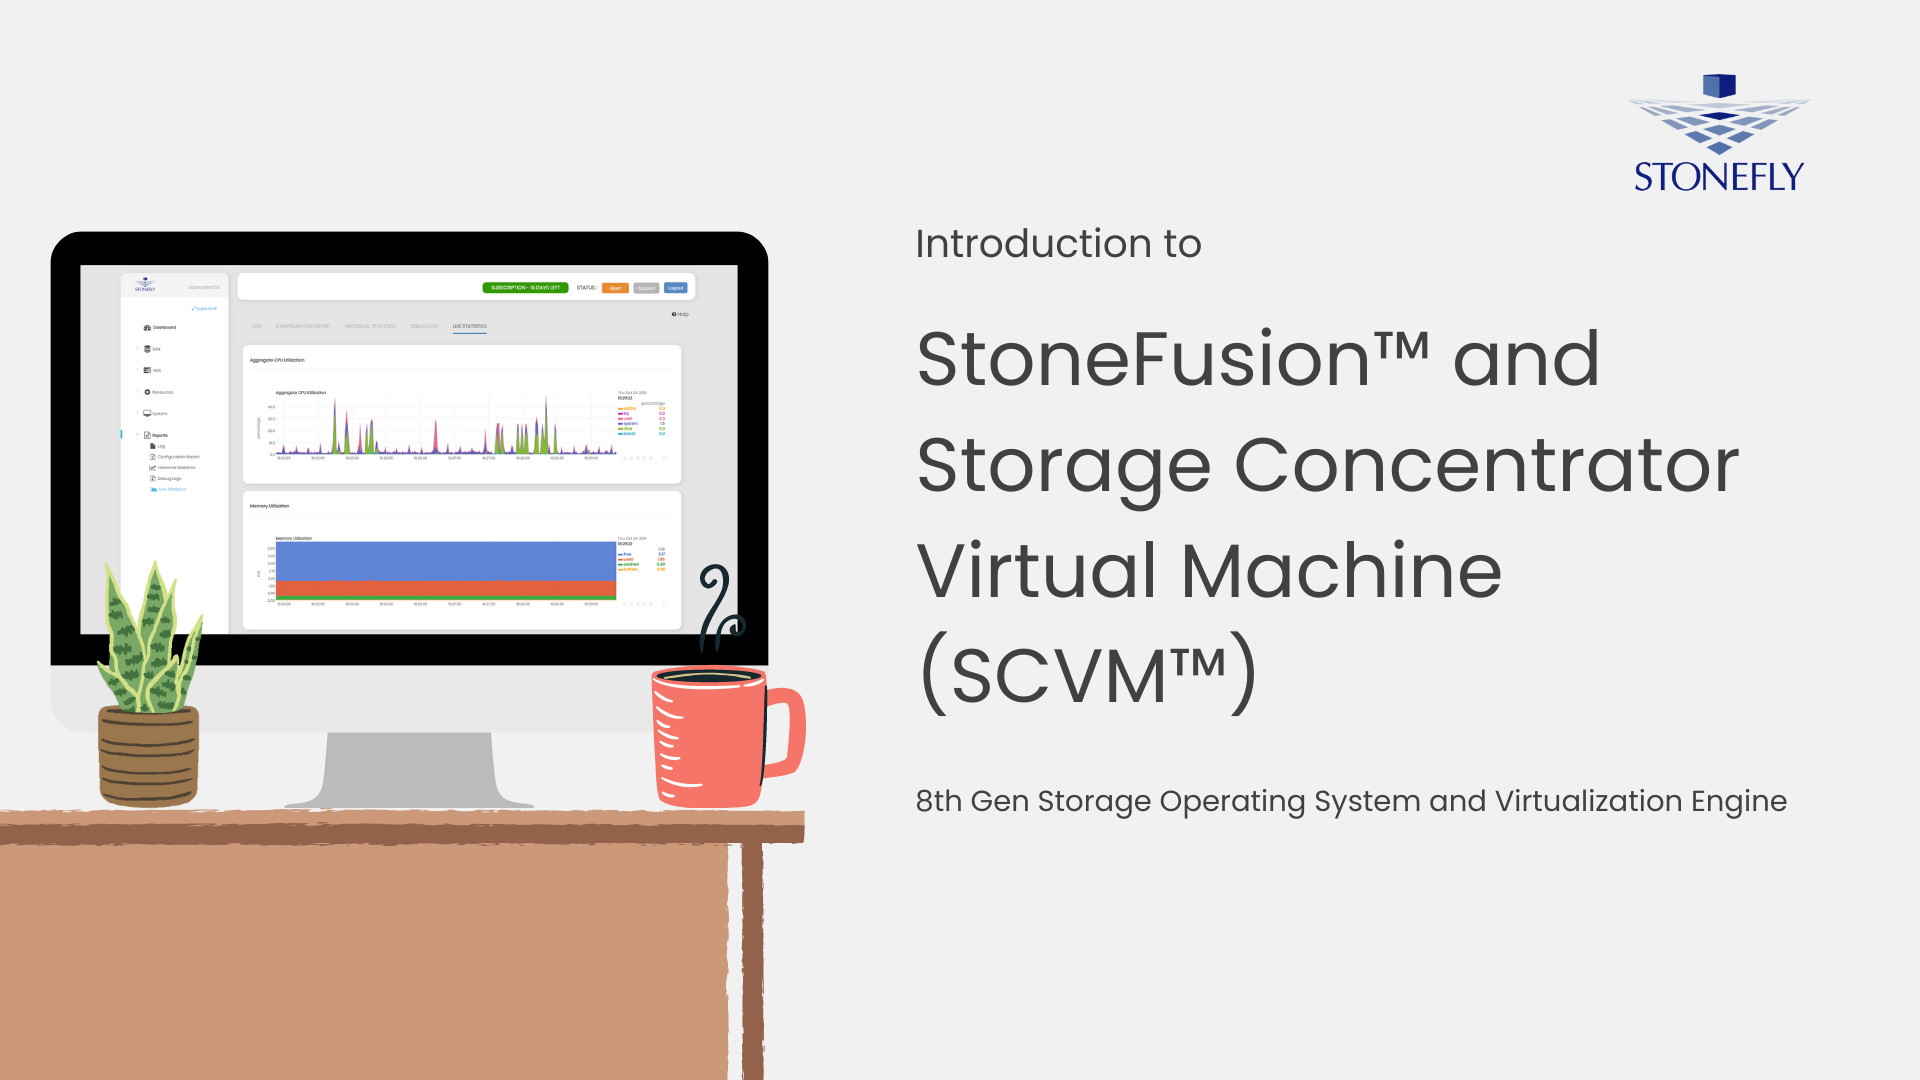 Introduction to StoneFly’s Patented Storage Operating System – StoneFusion™ and SCVM™